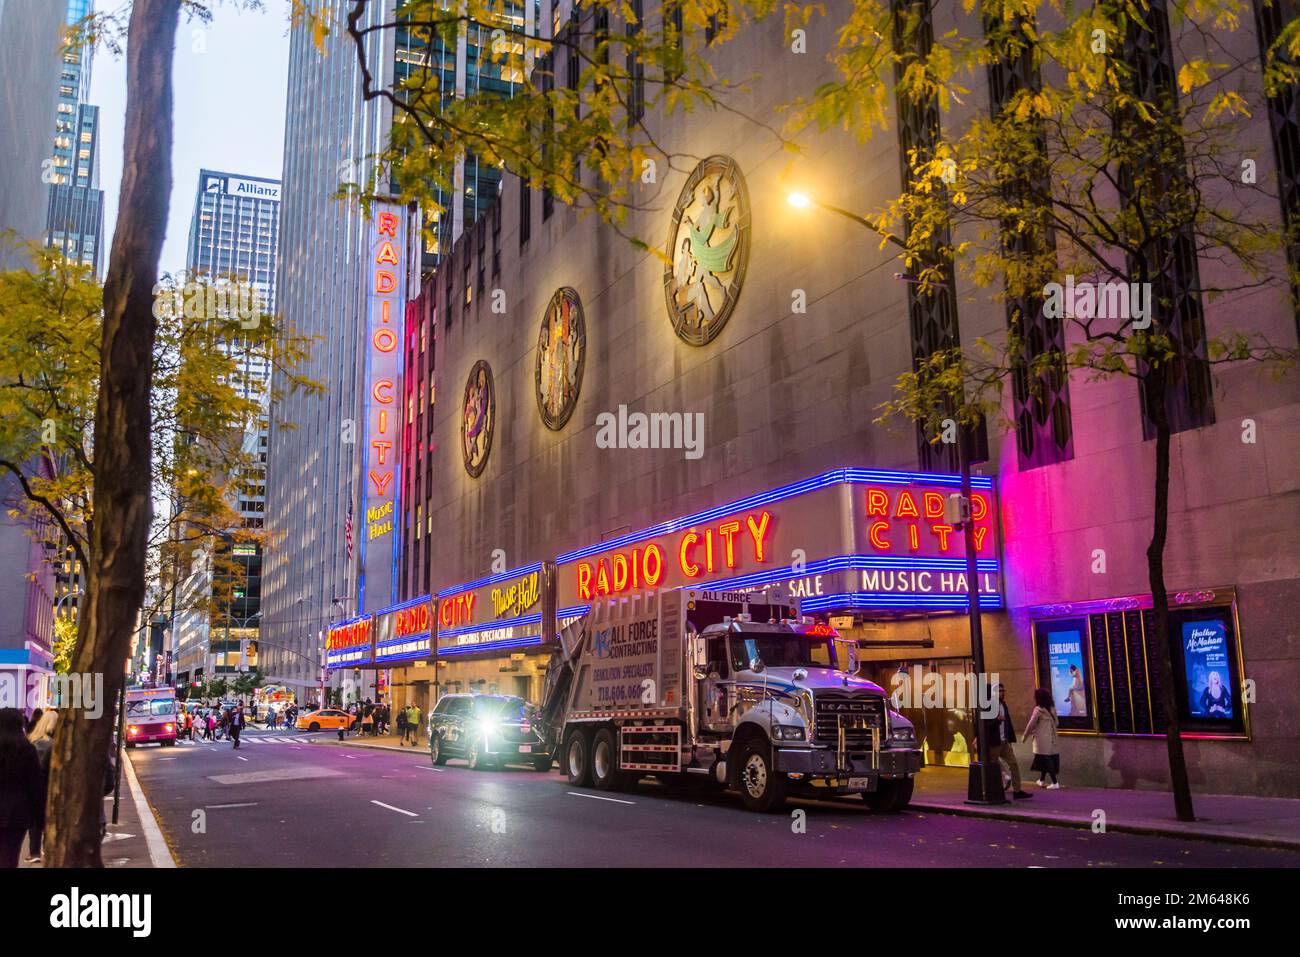 Radio City Music Hall, legendary Art deco theatre hosting the Christmas Spectacular with the Rockettes, concerts & more, New York City, USA Stock Photo